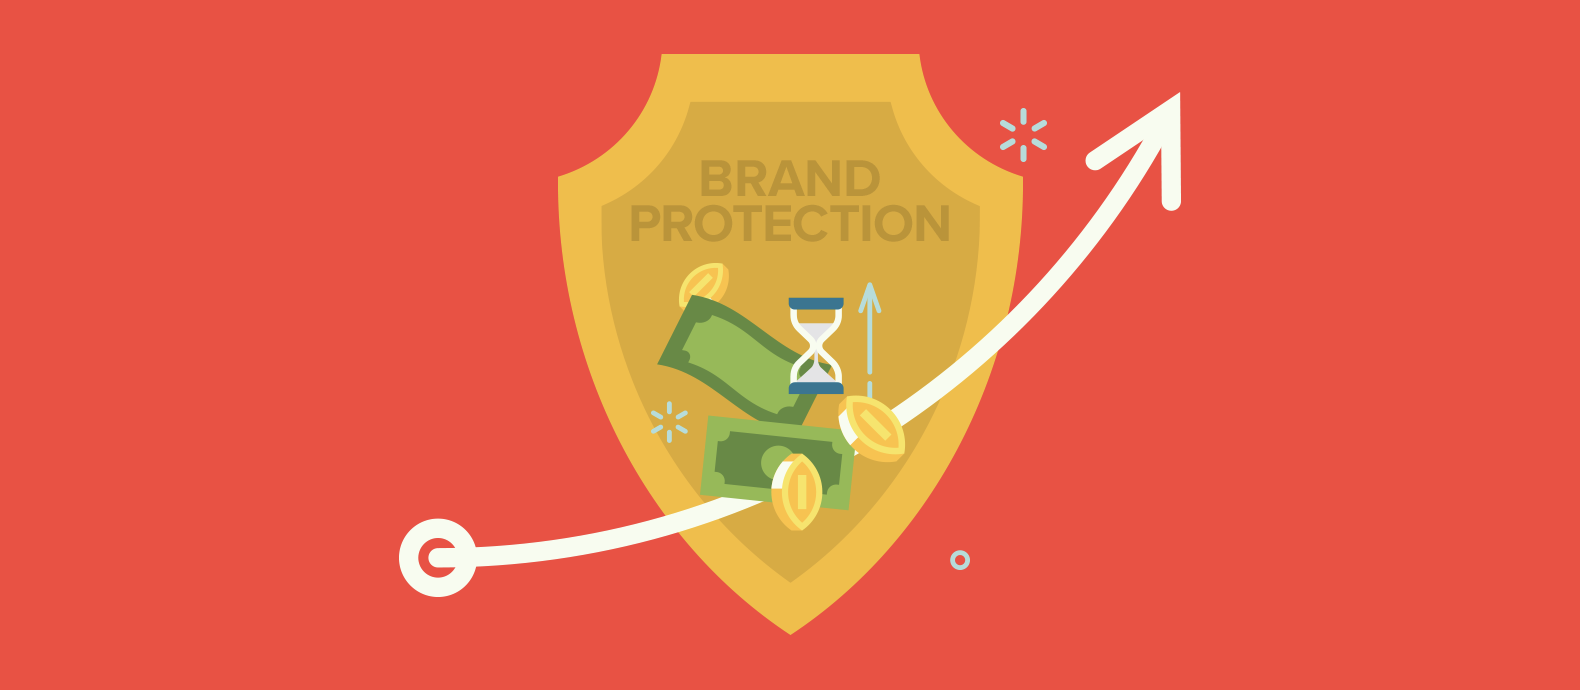 Why brand protection is important for growth - Red Points